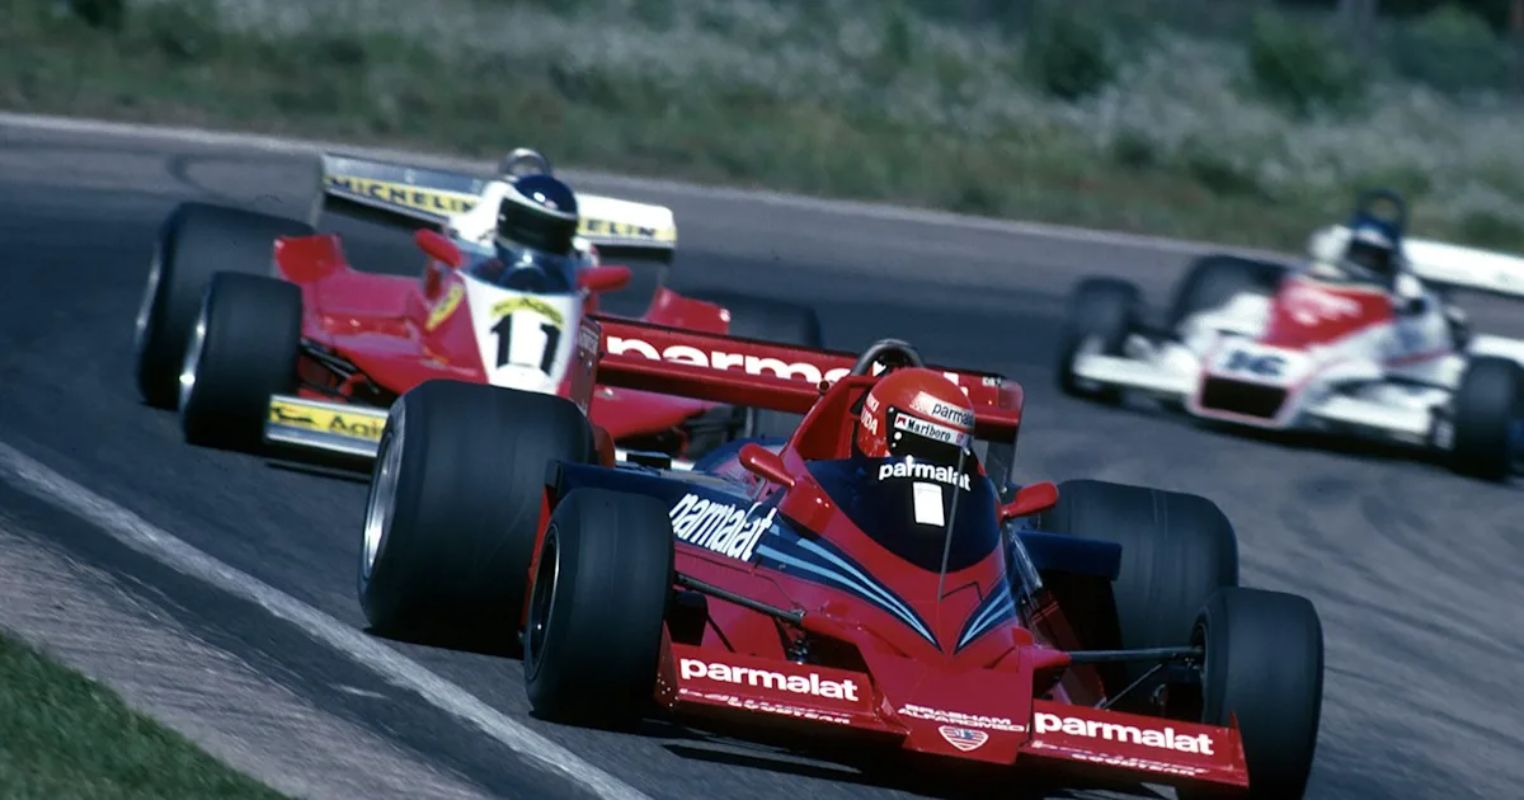 Story of the Legendary Brabham BT46B Fan Car and Some Forgotten